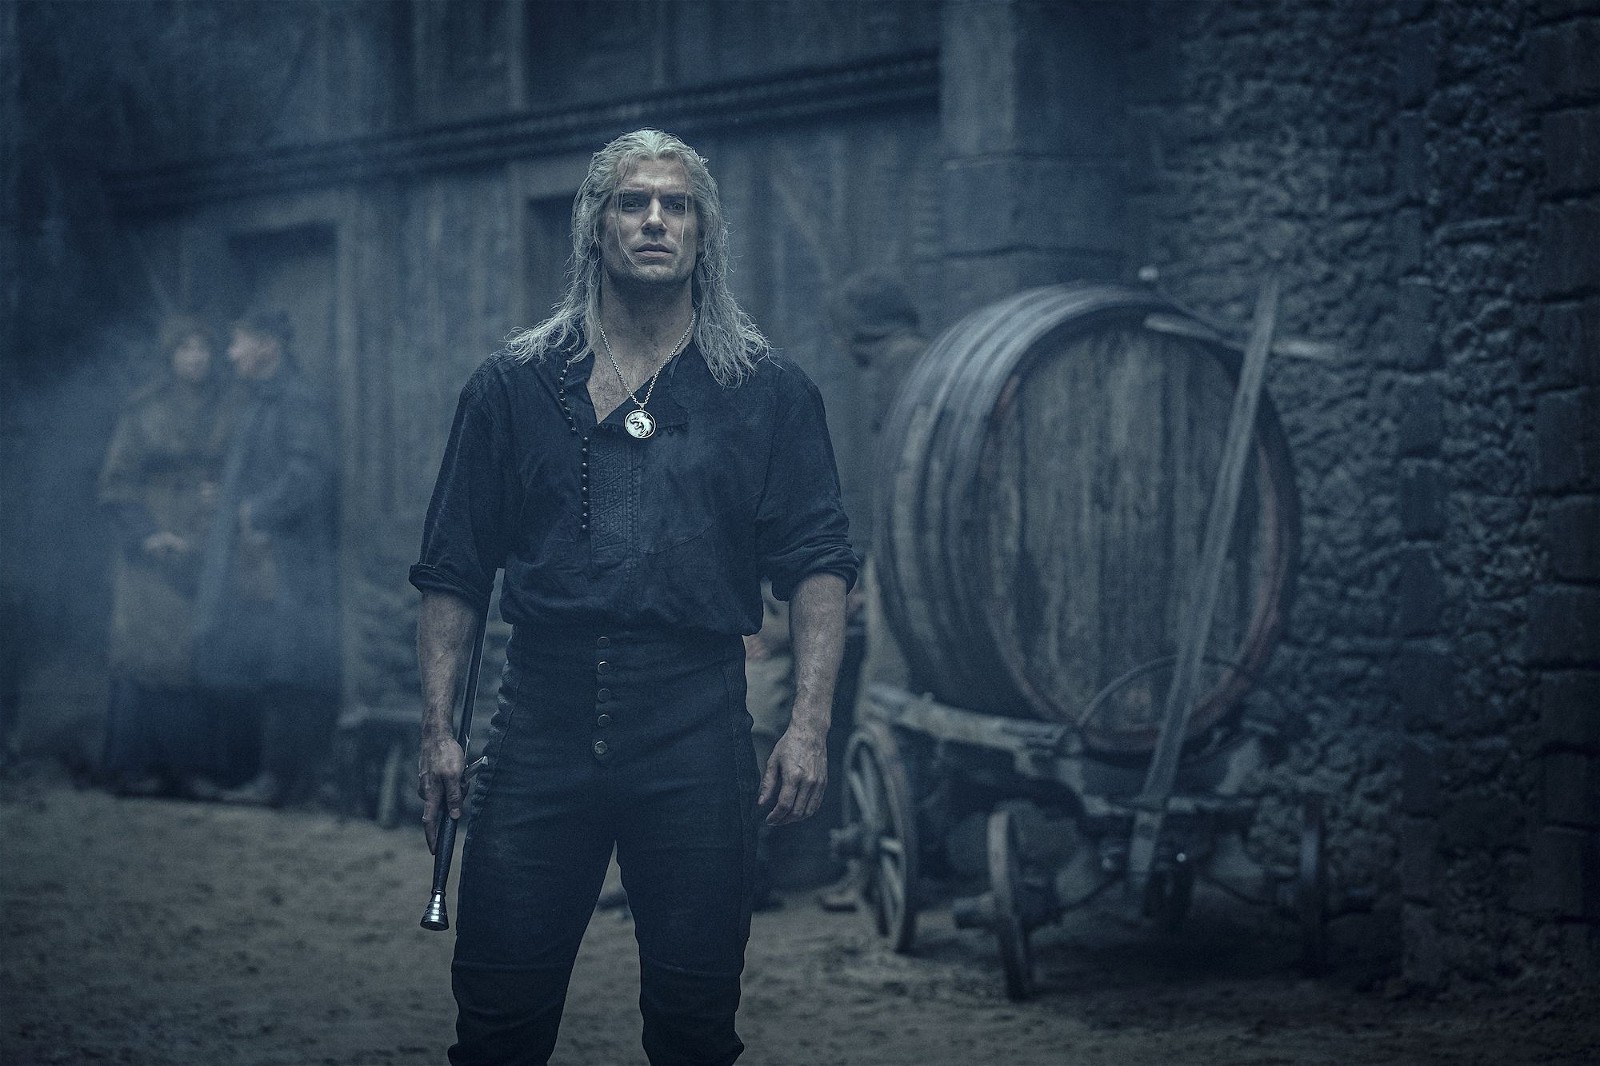 Henry Cavill in The Witcher as the Butcher of Blaviken